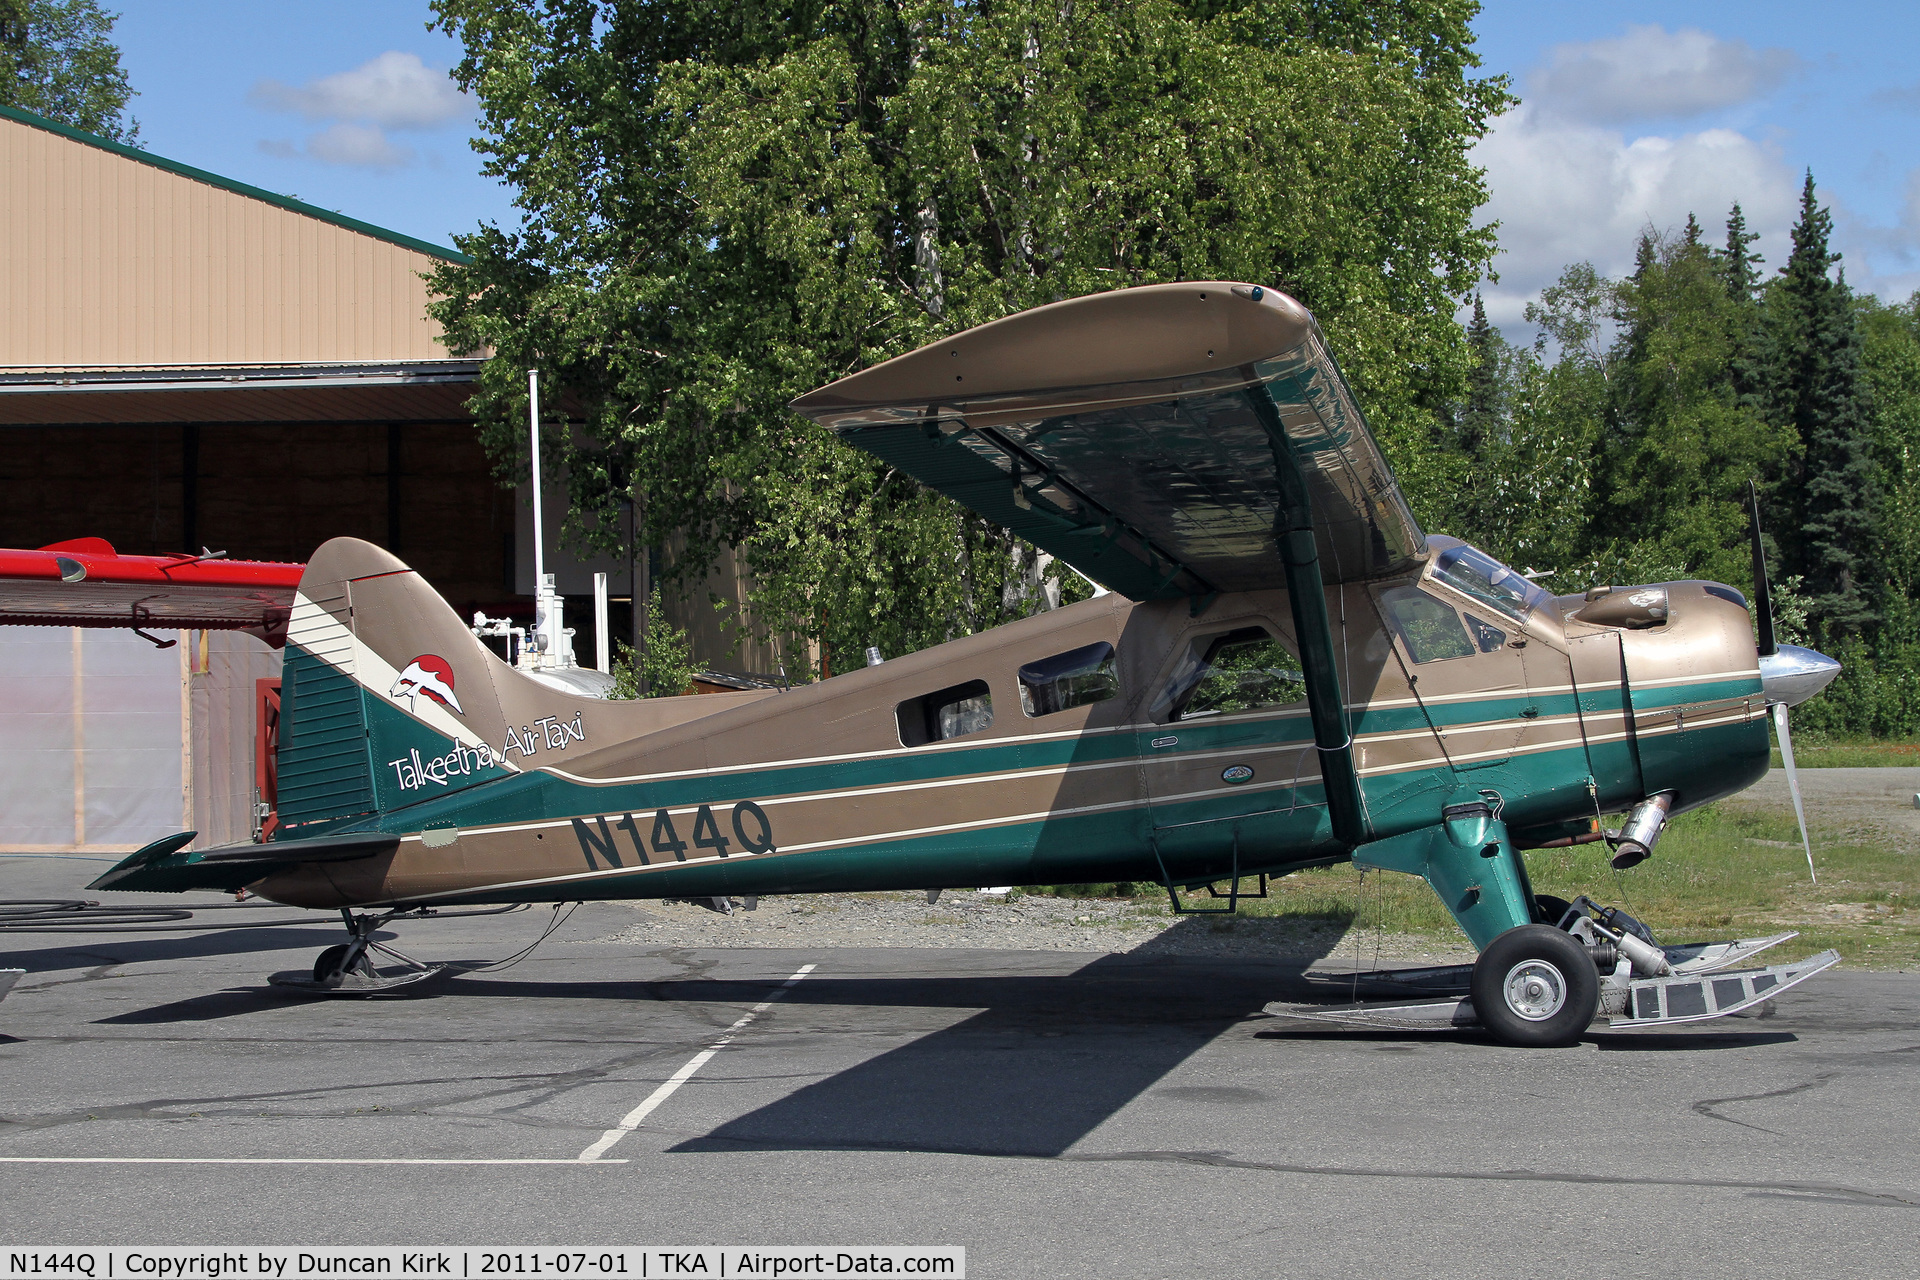 N144Q, 1961 De Havilland Canada DHC-2 Beaver Mk.1 C/N 1465, This Talkeetna Air Service Beaver is another kitted with skis